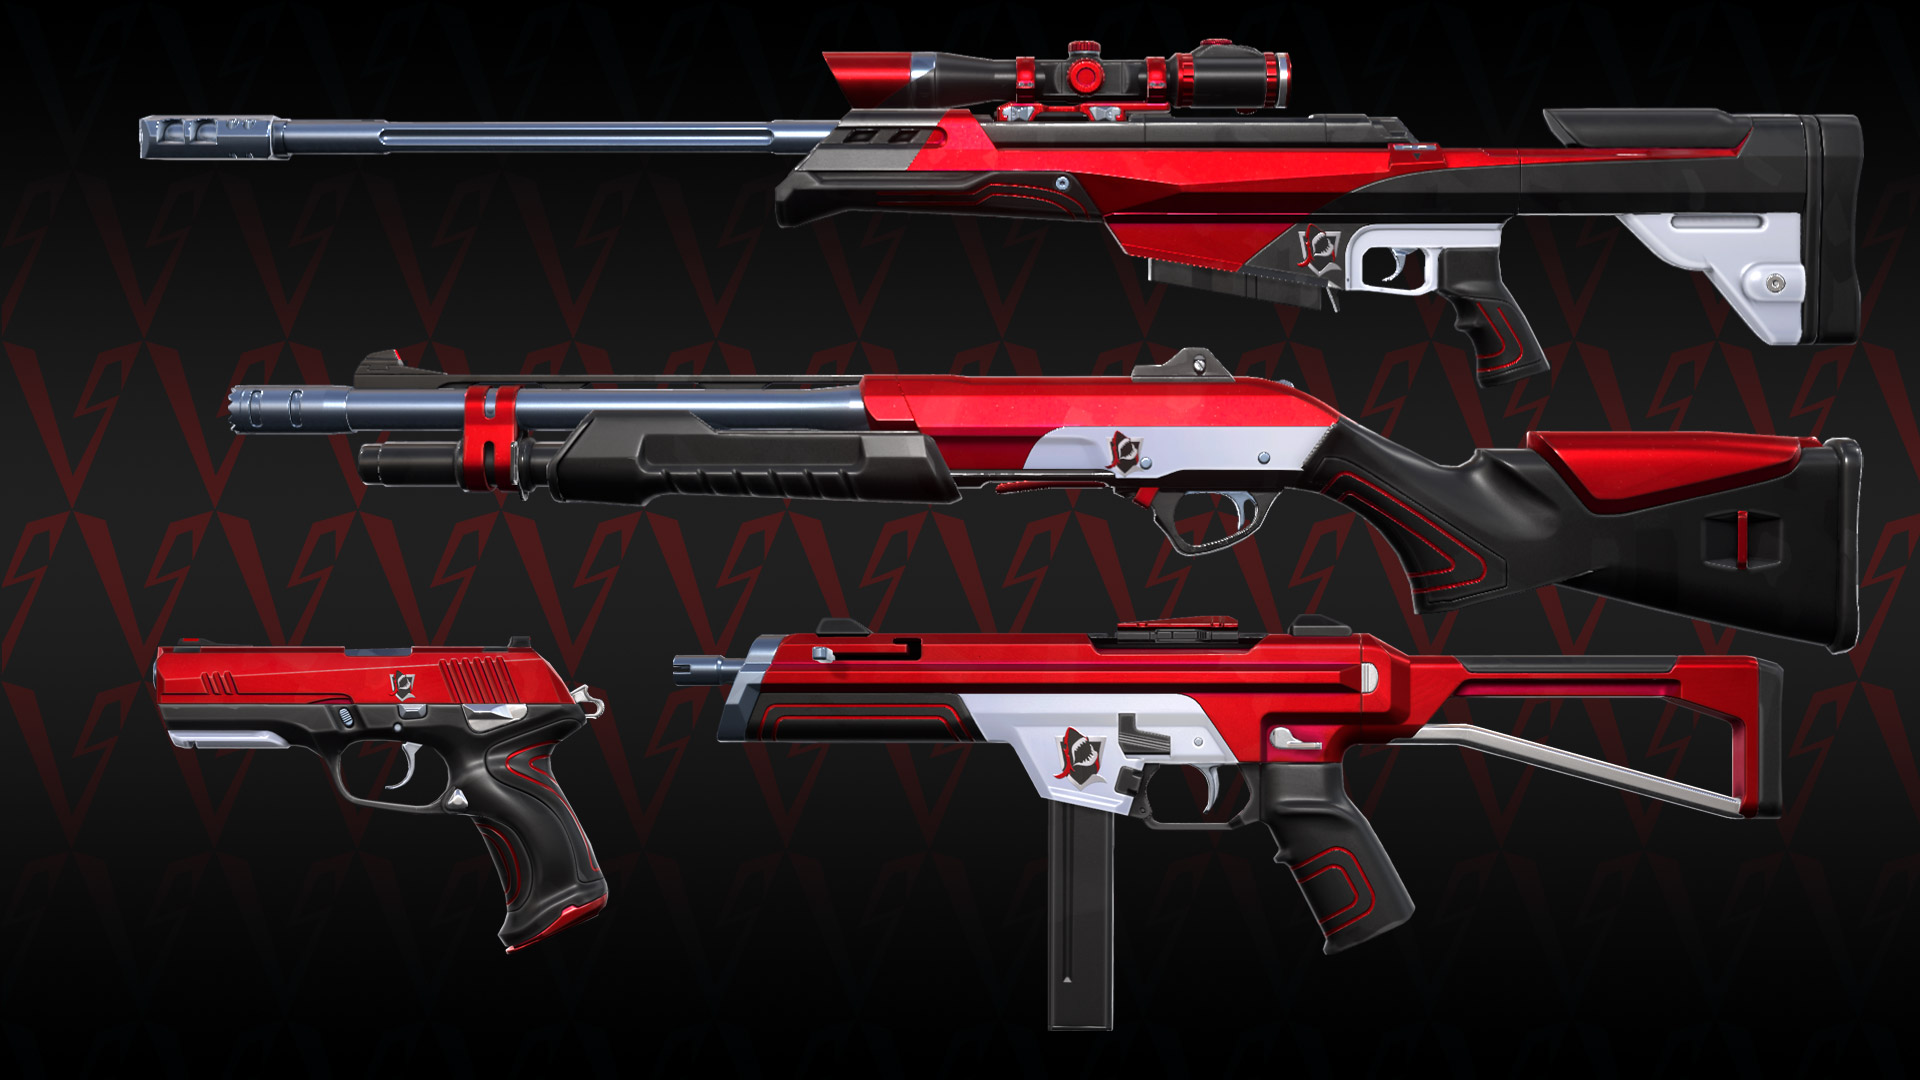 Valorant Red Alert | Full collection, HD-Images, How to Unlock